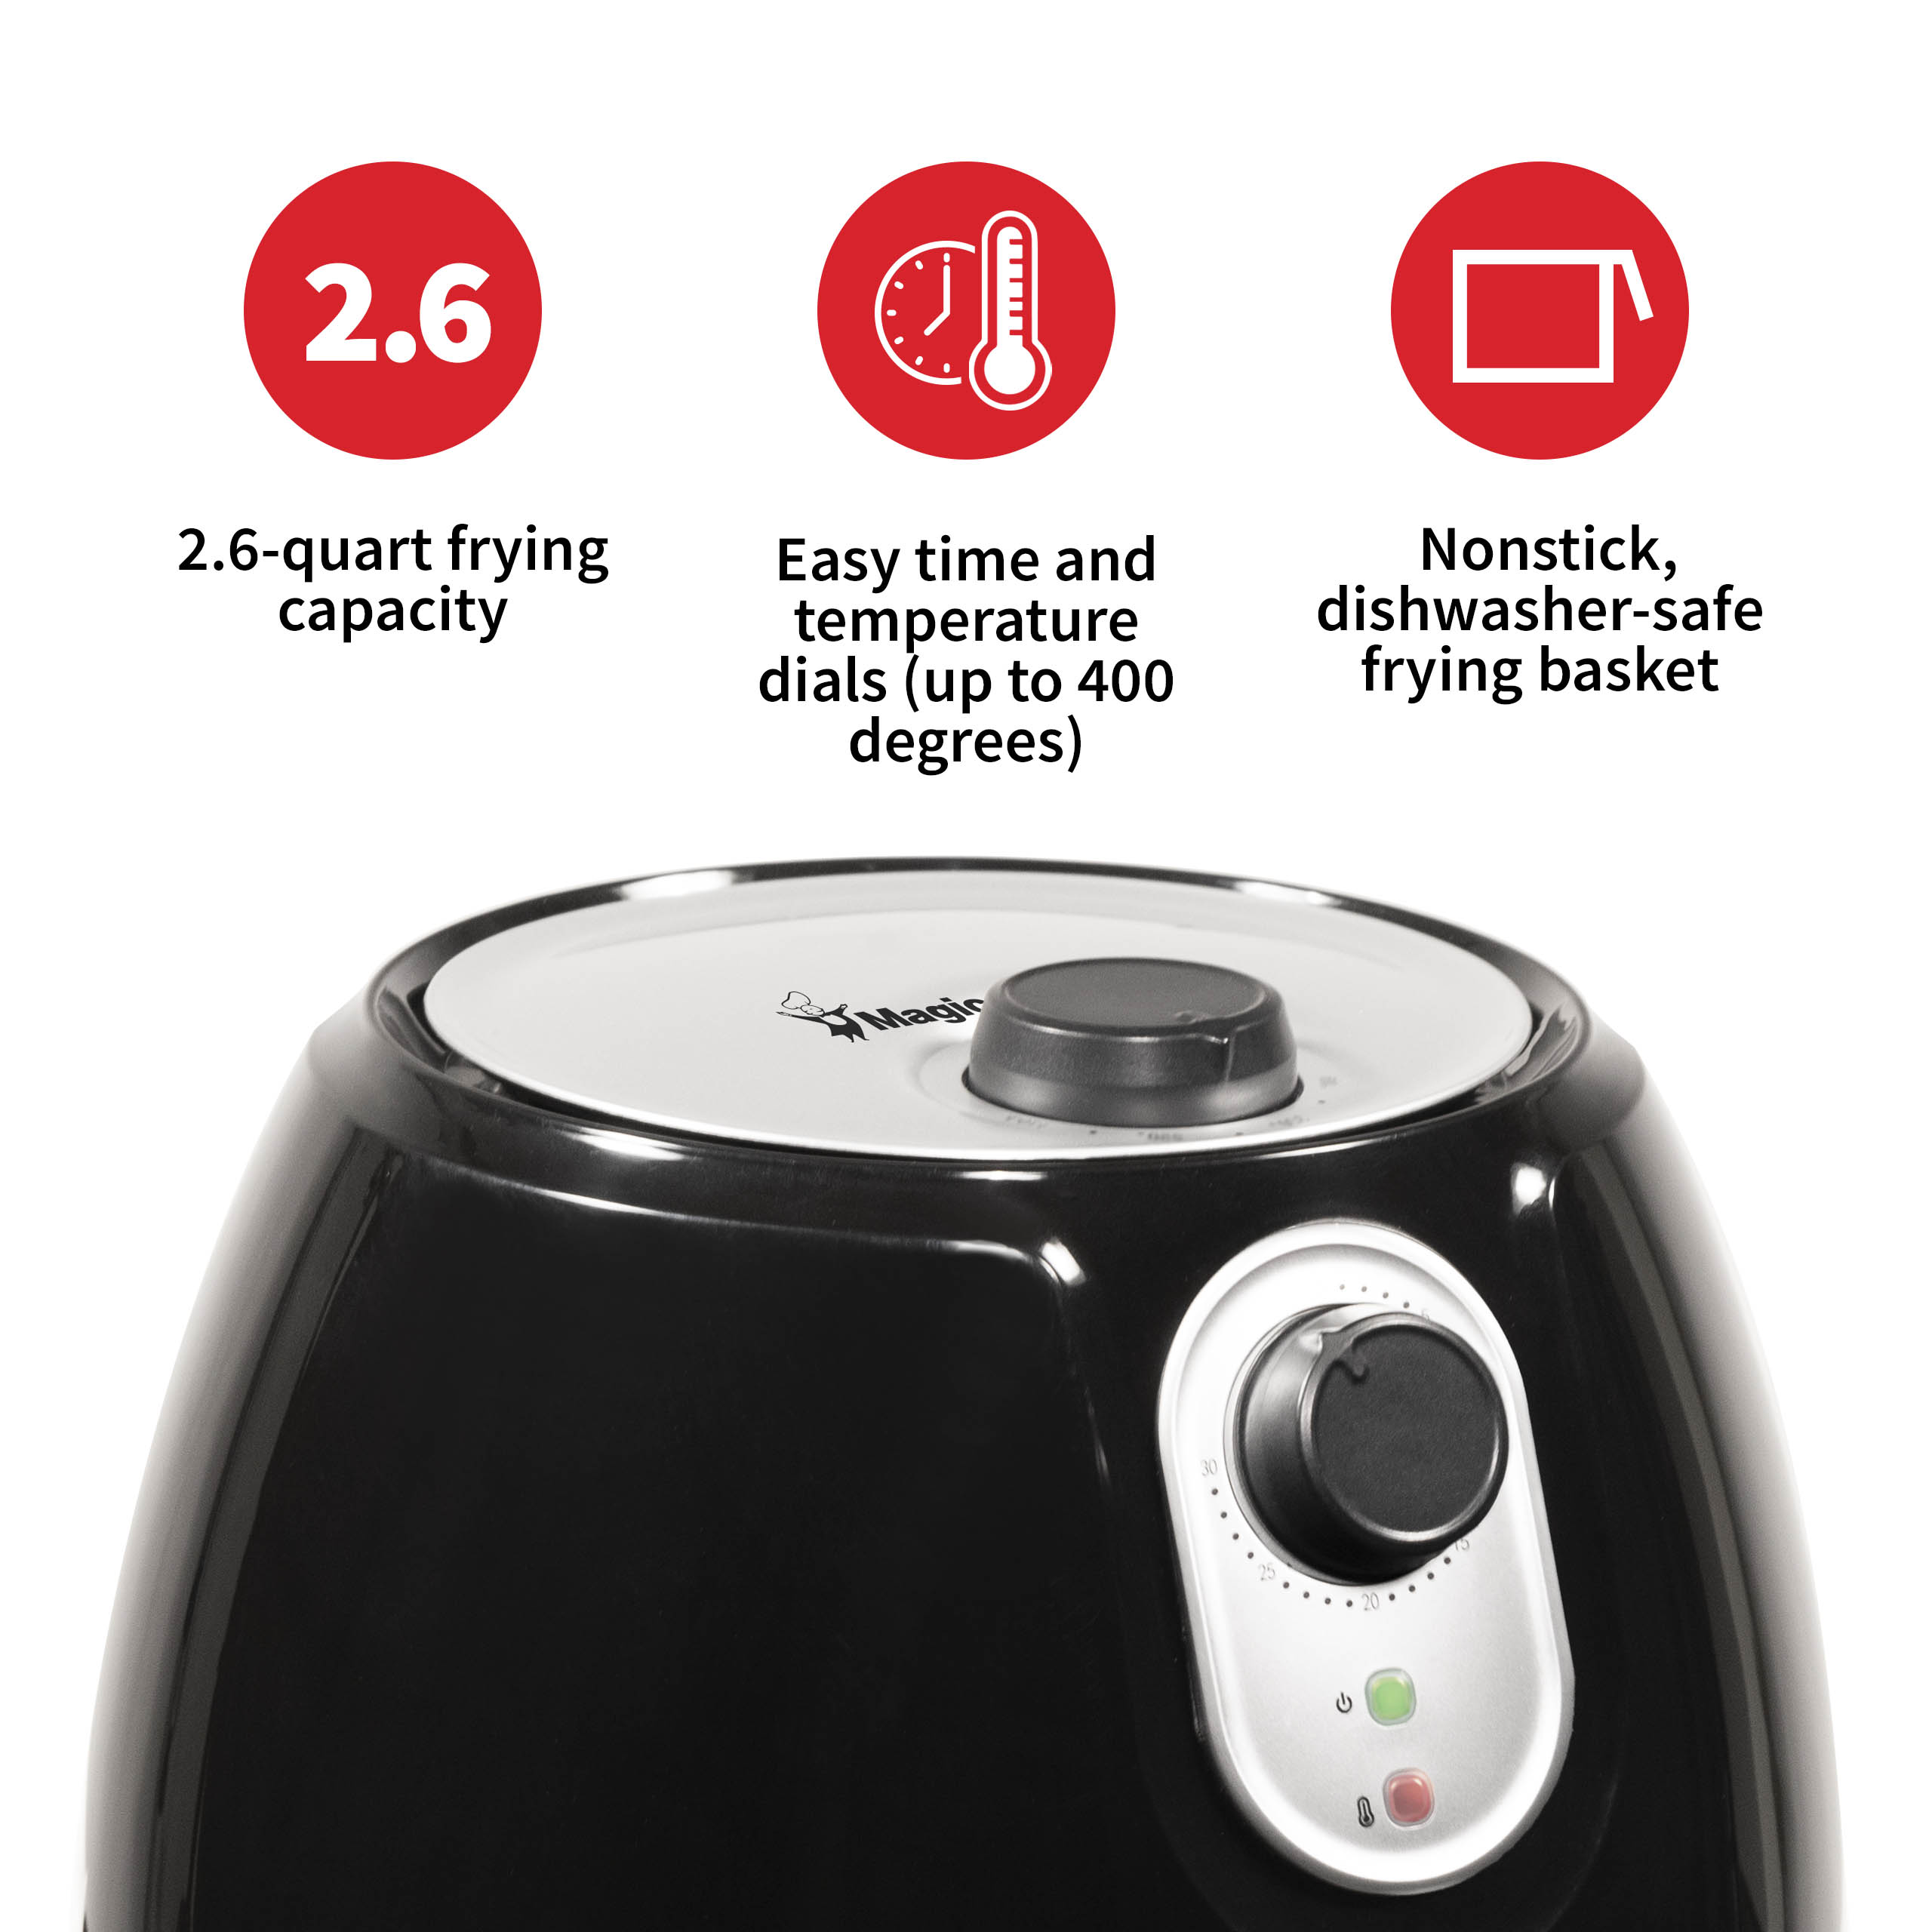 Magic Chef Air Fryer, For Healthy Fried Cooker Food, 2.6 Quart Capacity with Airfryer Cook Book, MCAF26MB - image 2 of 6